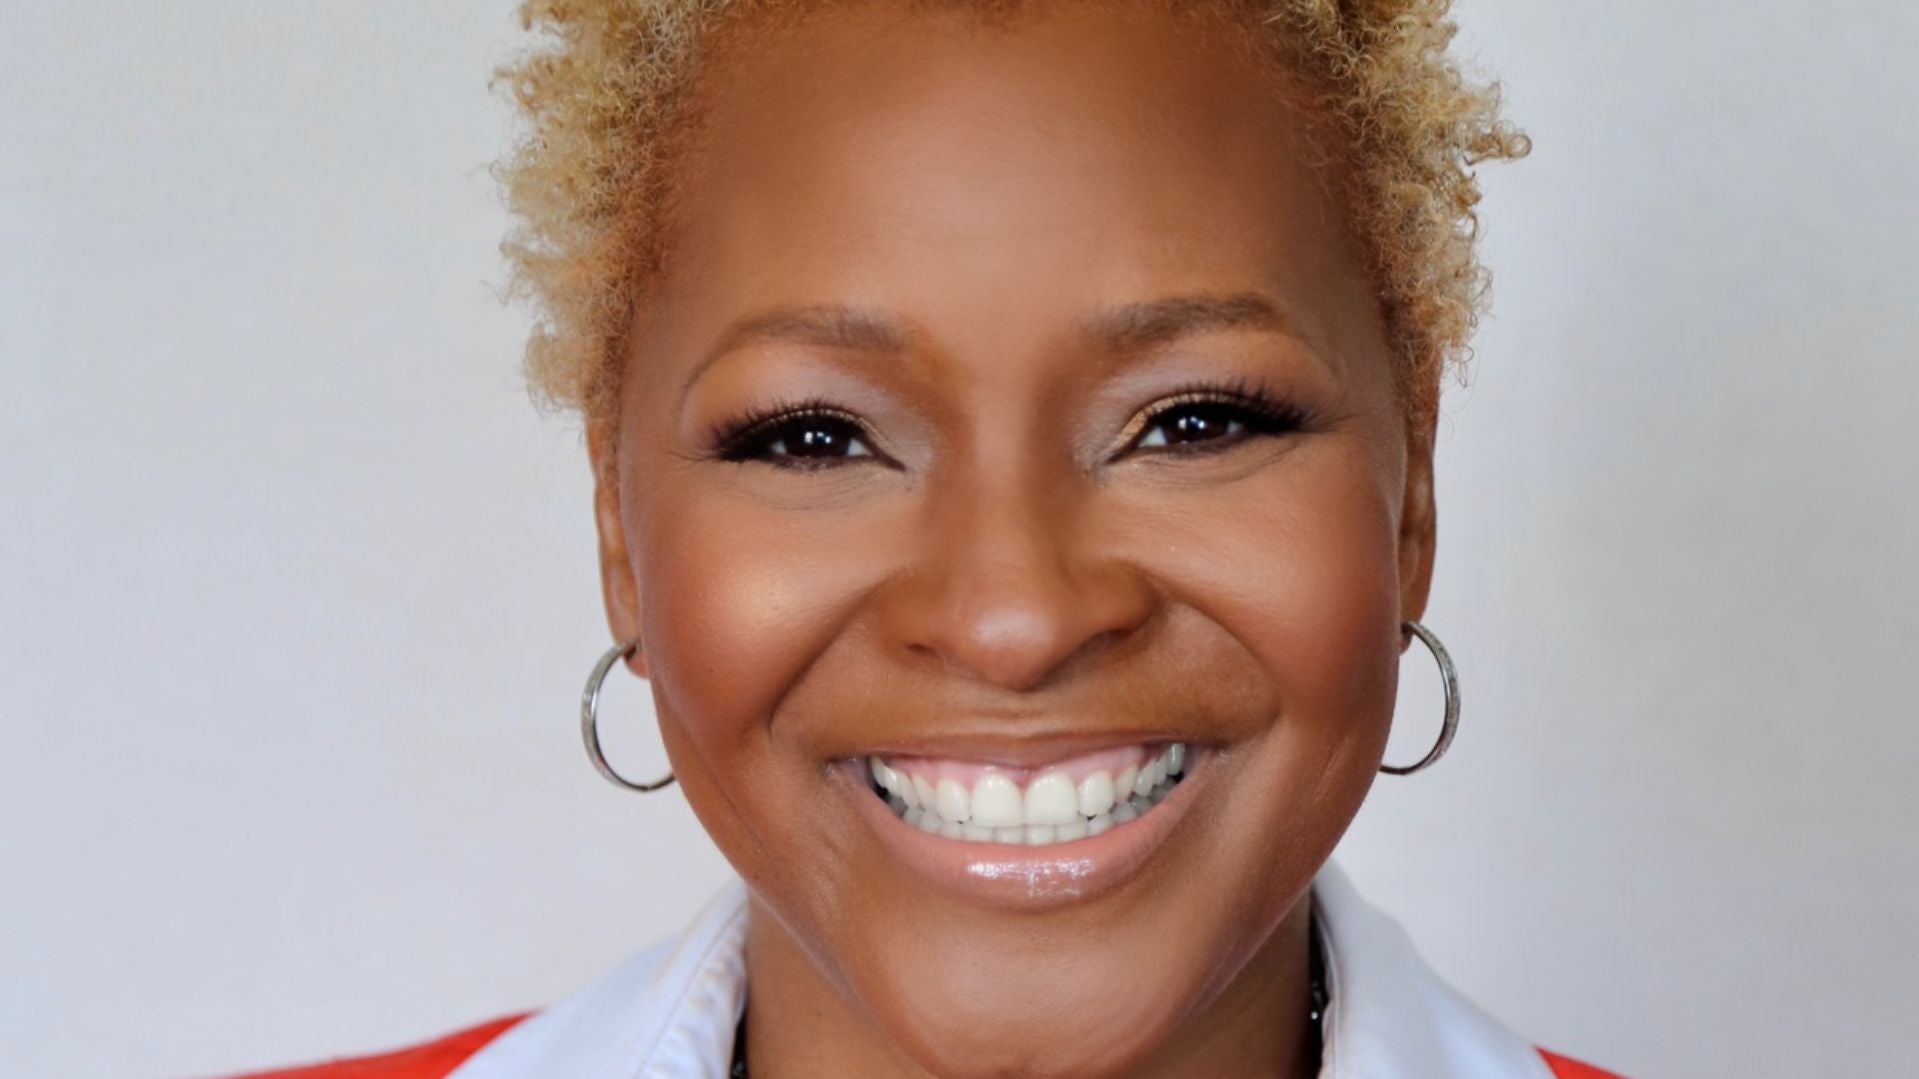 Rev. LaKeesha Walrond Appointed As First Black Female President Of New York Theological Seminary